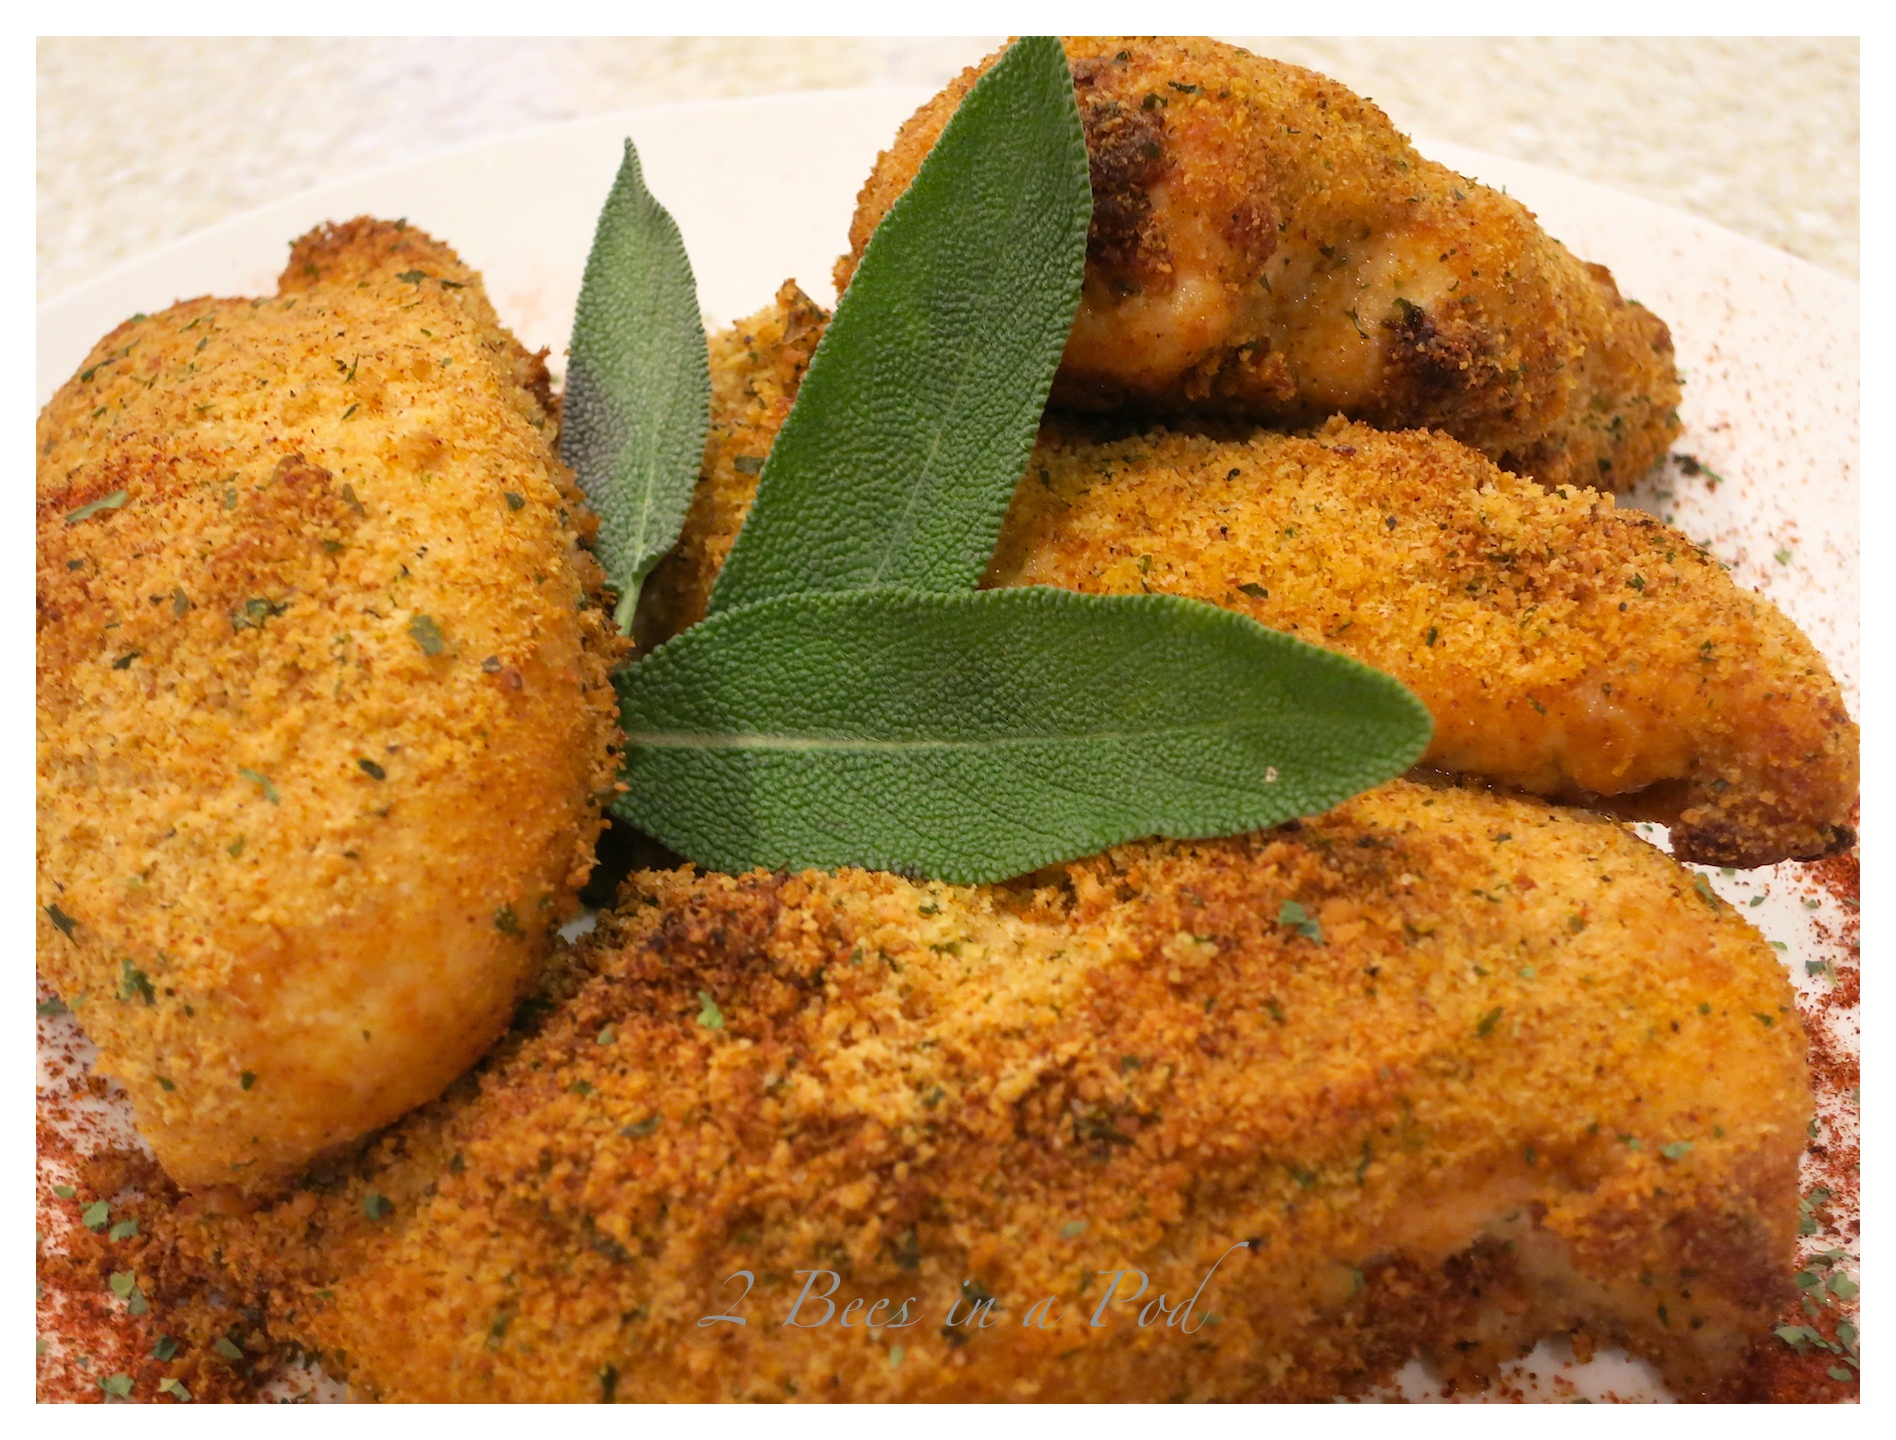 Another delicious Weight Watchers recipe...Parmesan Chicken Cutlets. Super easy and delicious - a wonderful dinner. I never feel like I eat diet food :)